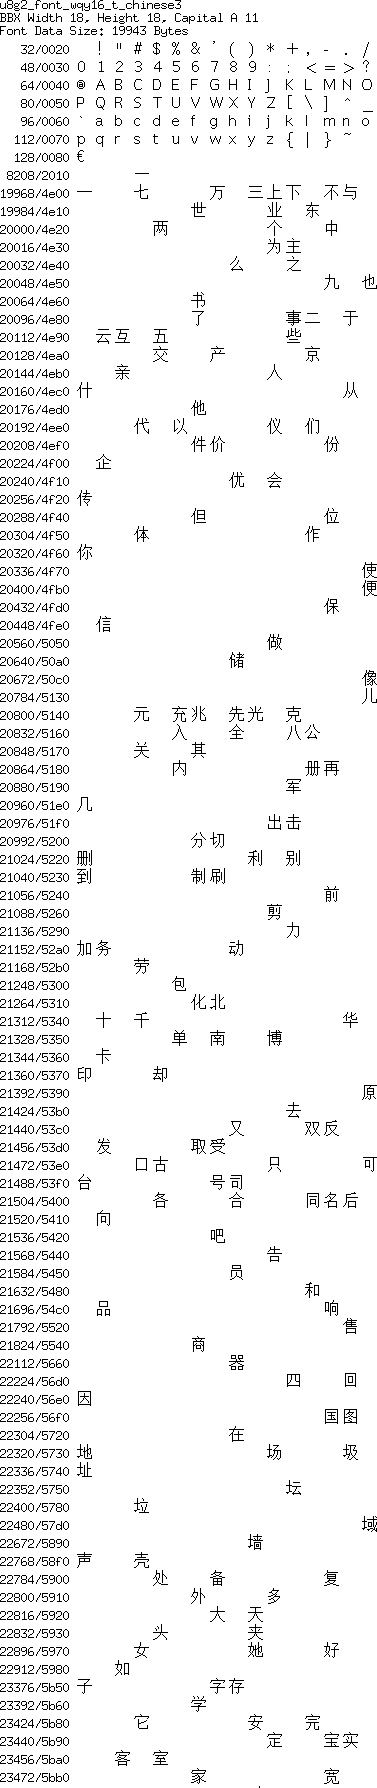 fntpic/u8g2_font_wqy16_t_chinese3.png